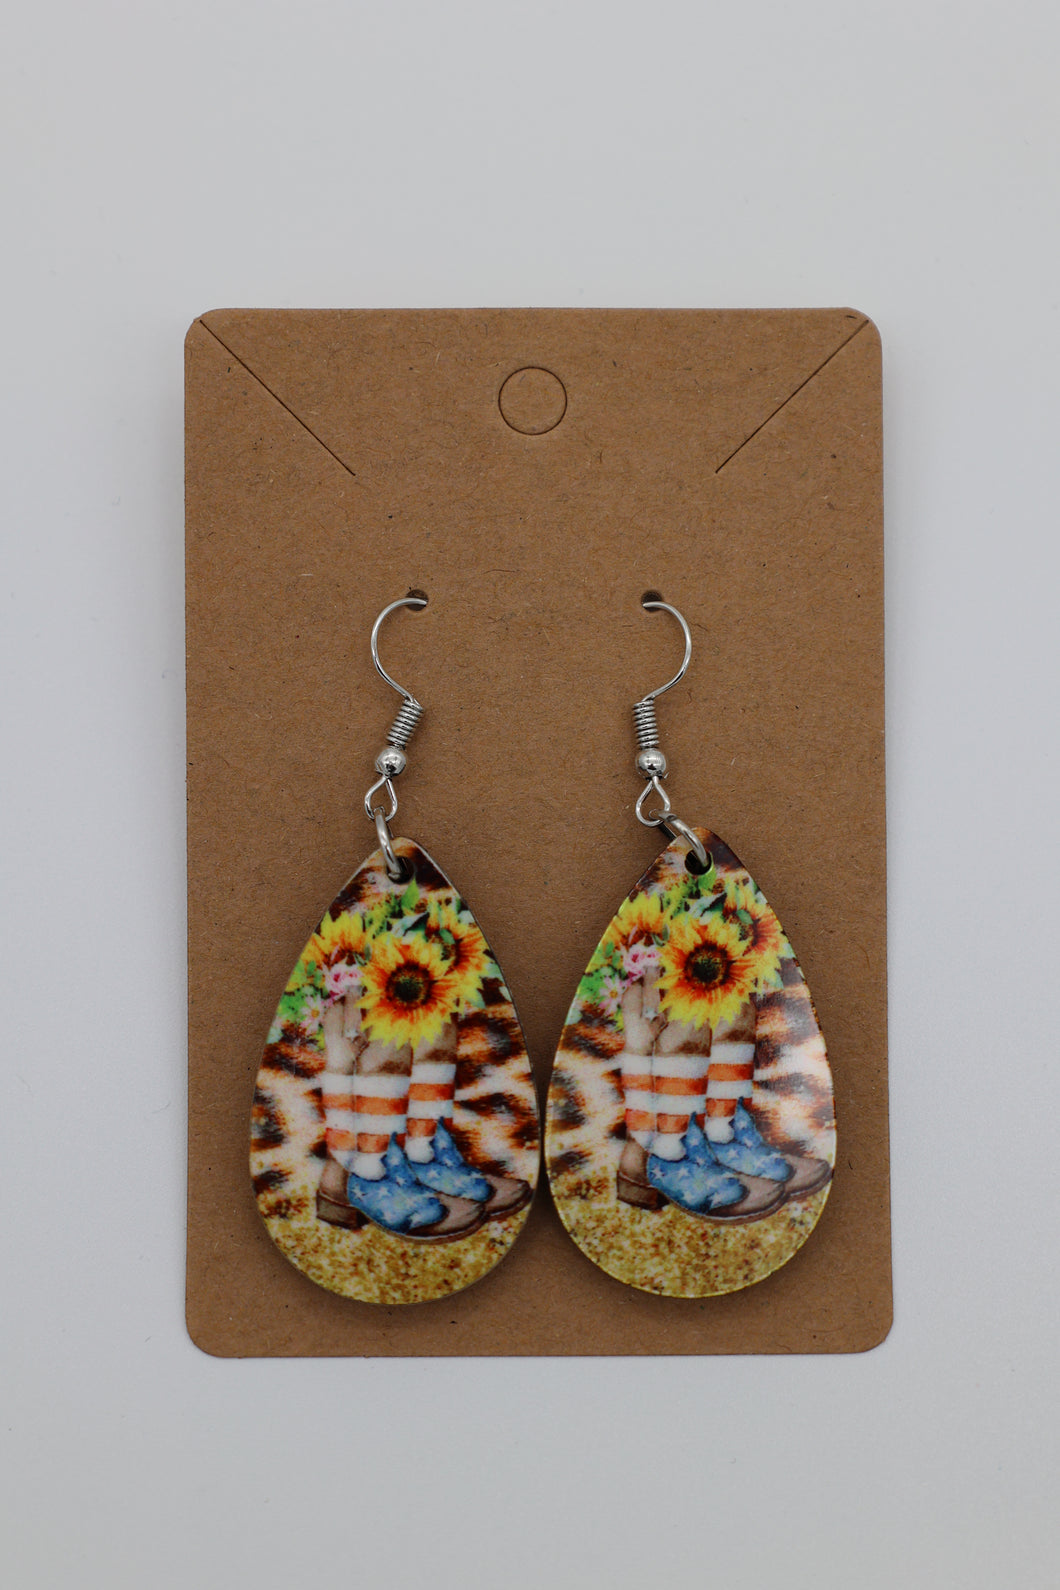 American Boots and Sunflowers Earrings